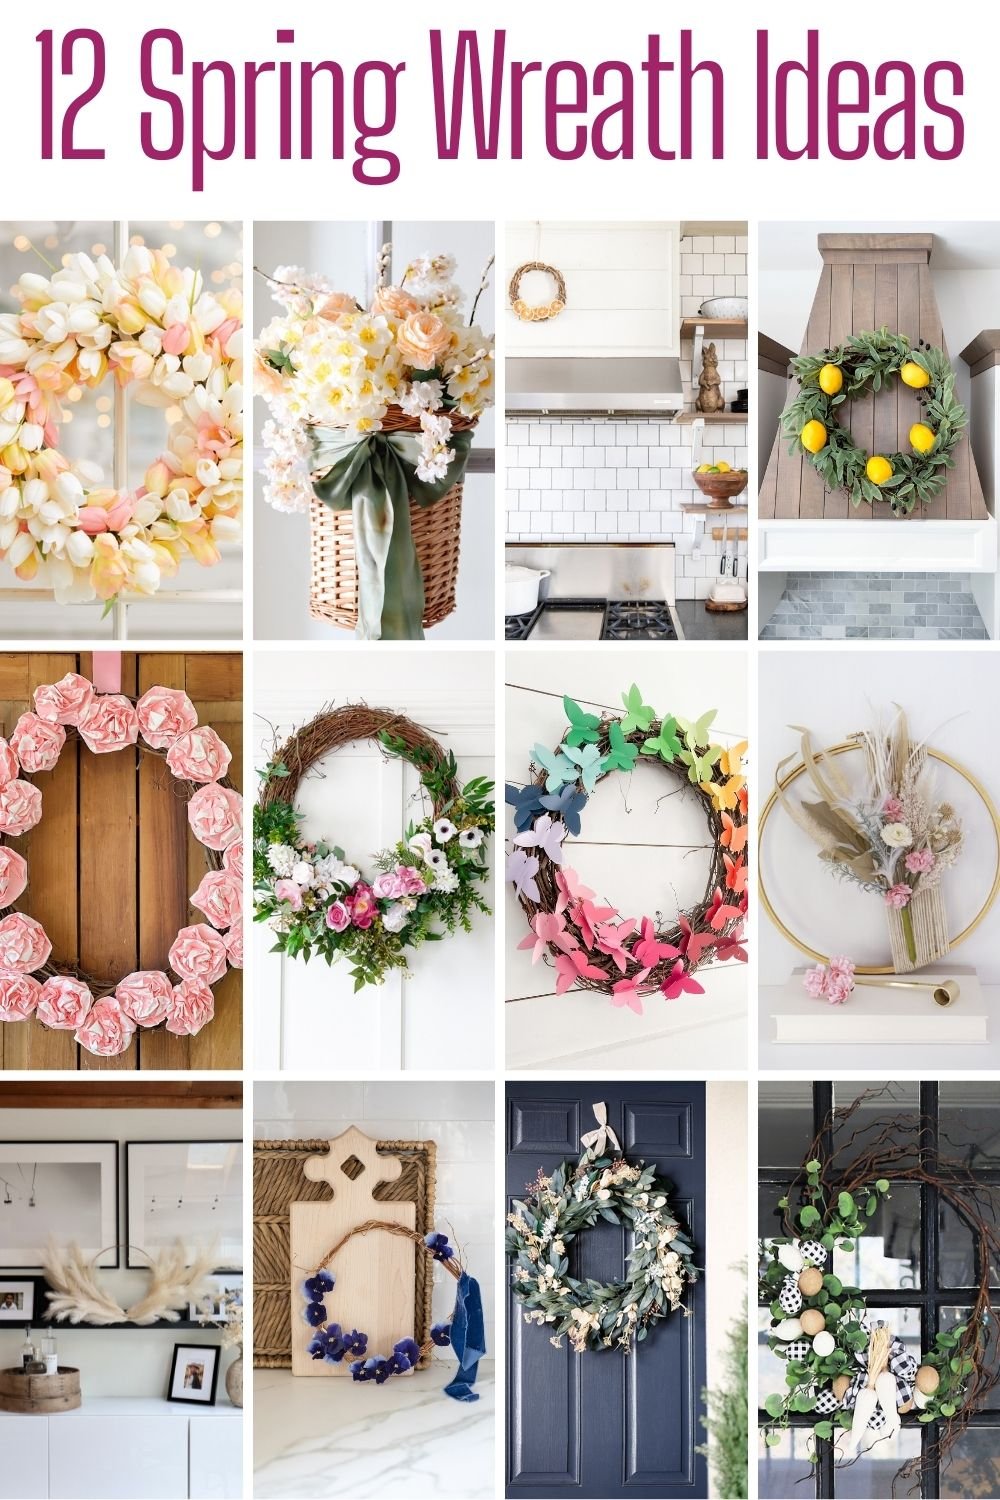 Wait. What? It's true. You can make a spring wreath for your home from a small lunch bag. And you can make it any color.